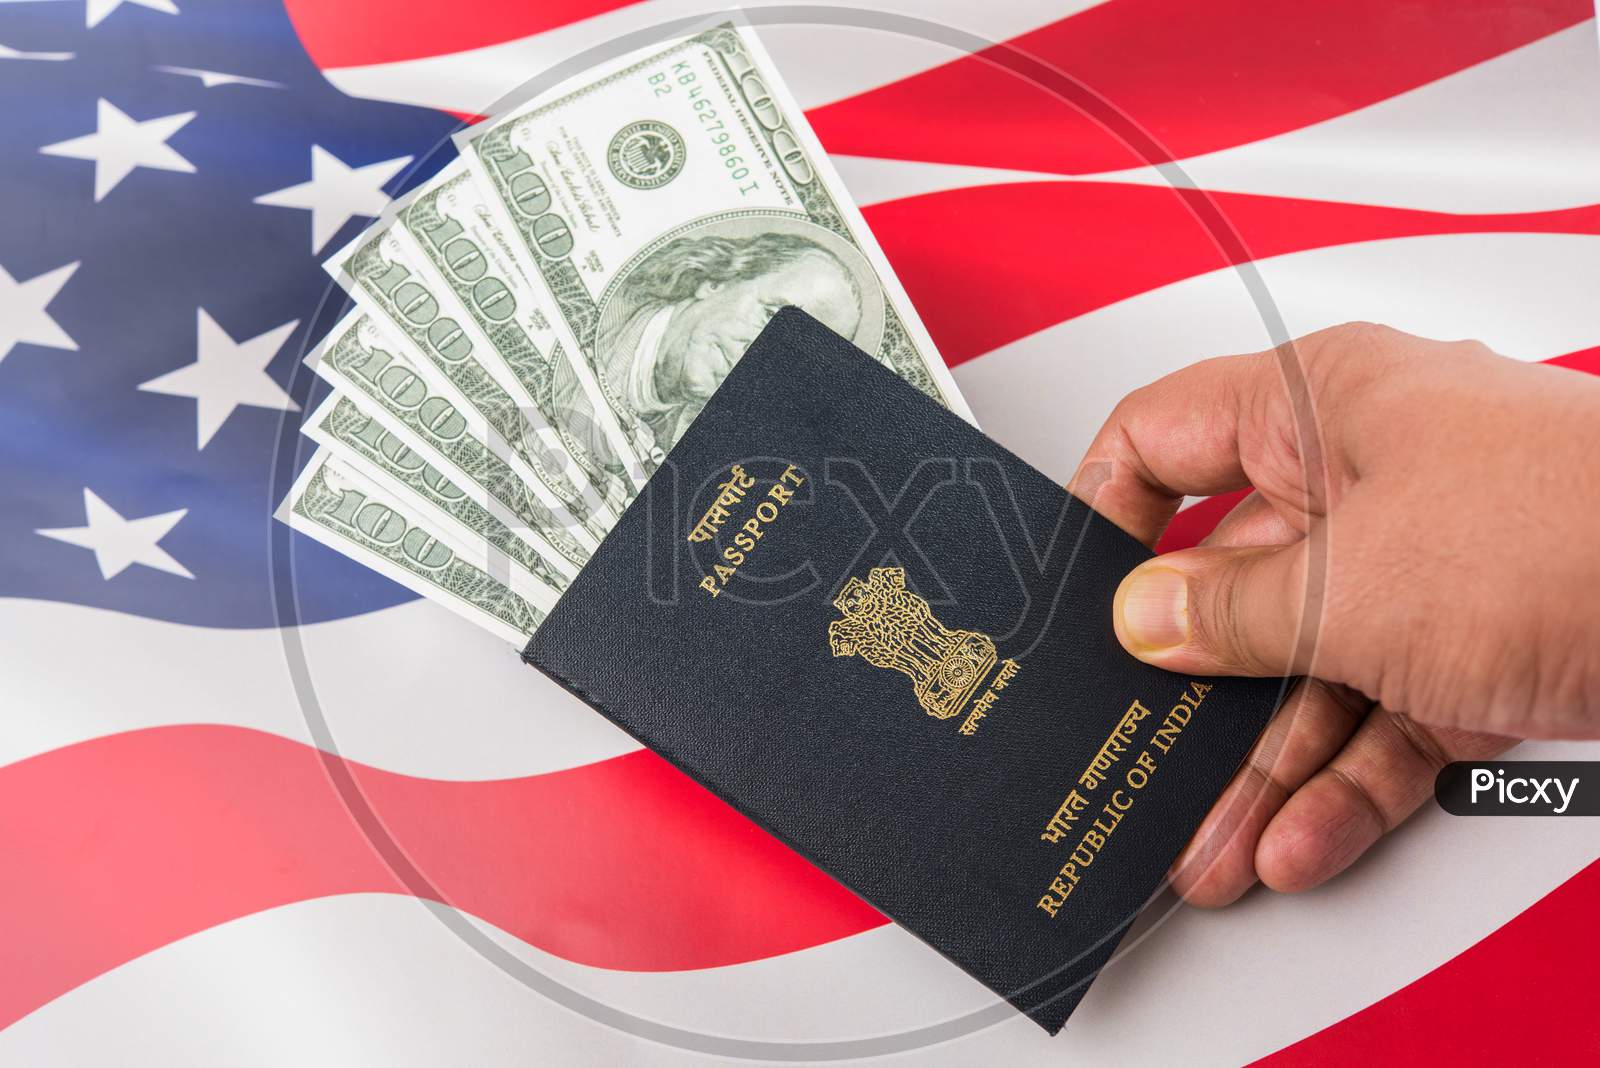 Indian passport with US Dollars with american flag in the background, Concept showing applying for tourist or H-1B visa